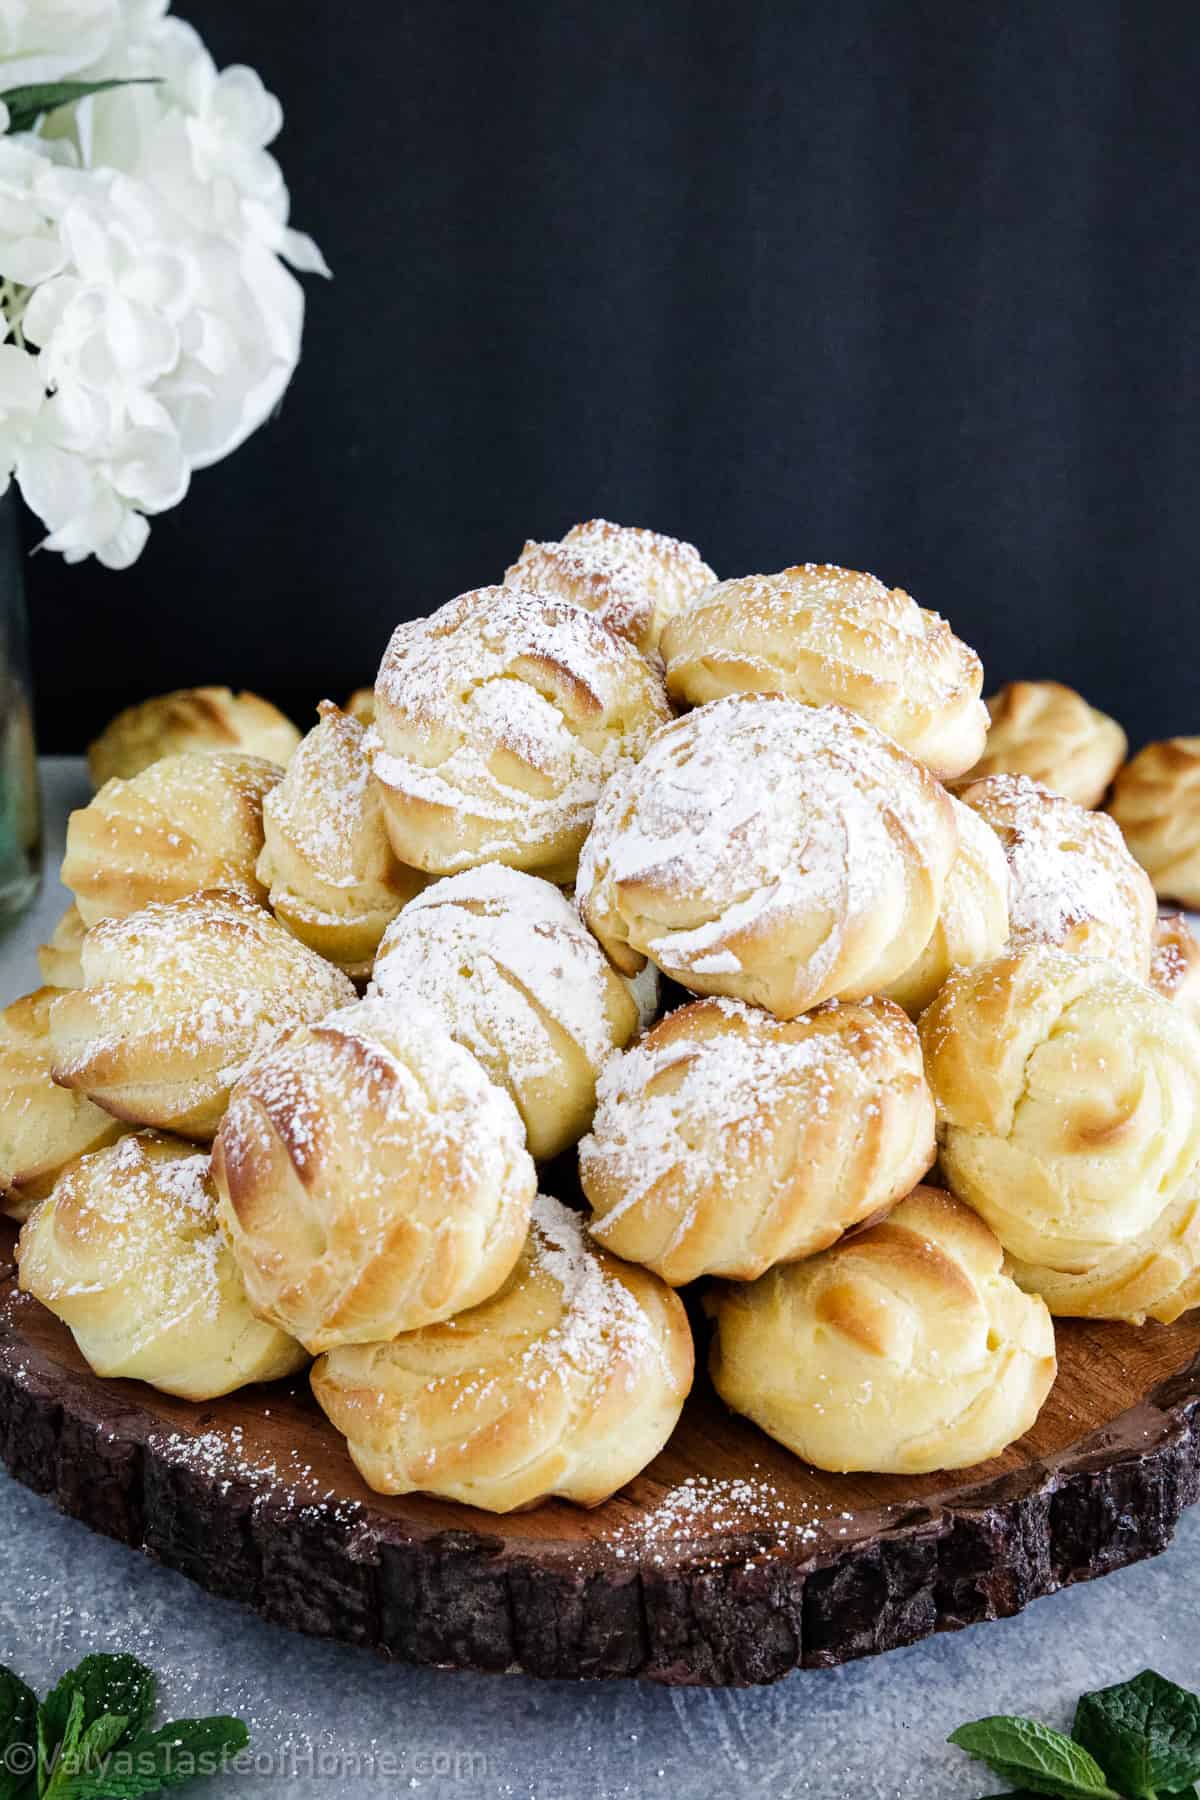 Cream puffs are a classic French dessert that are made by baking choux pastry dough (also known as pâte à choux) in small, round mounds.